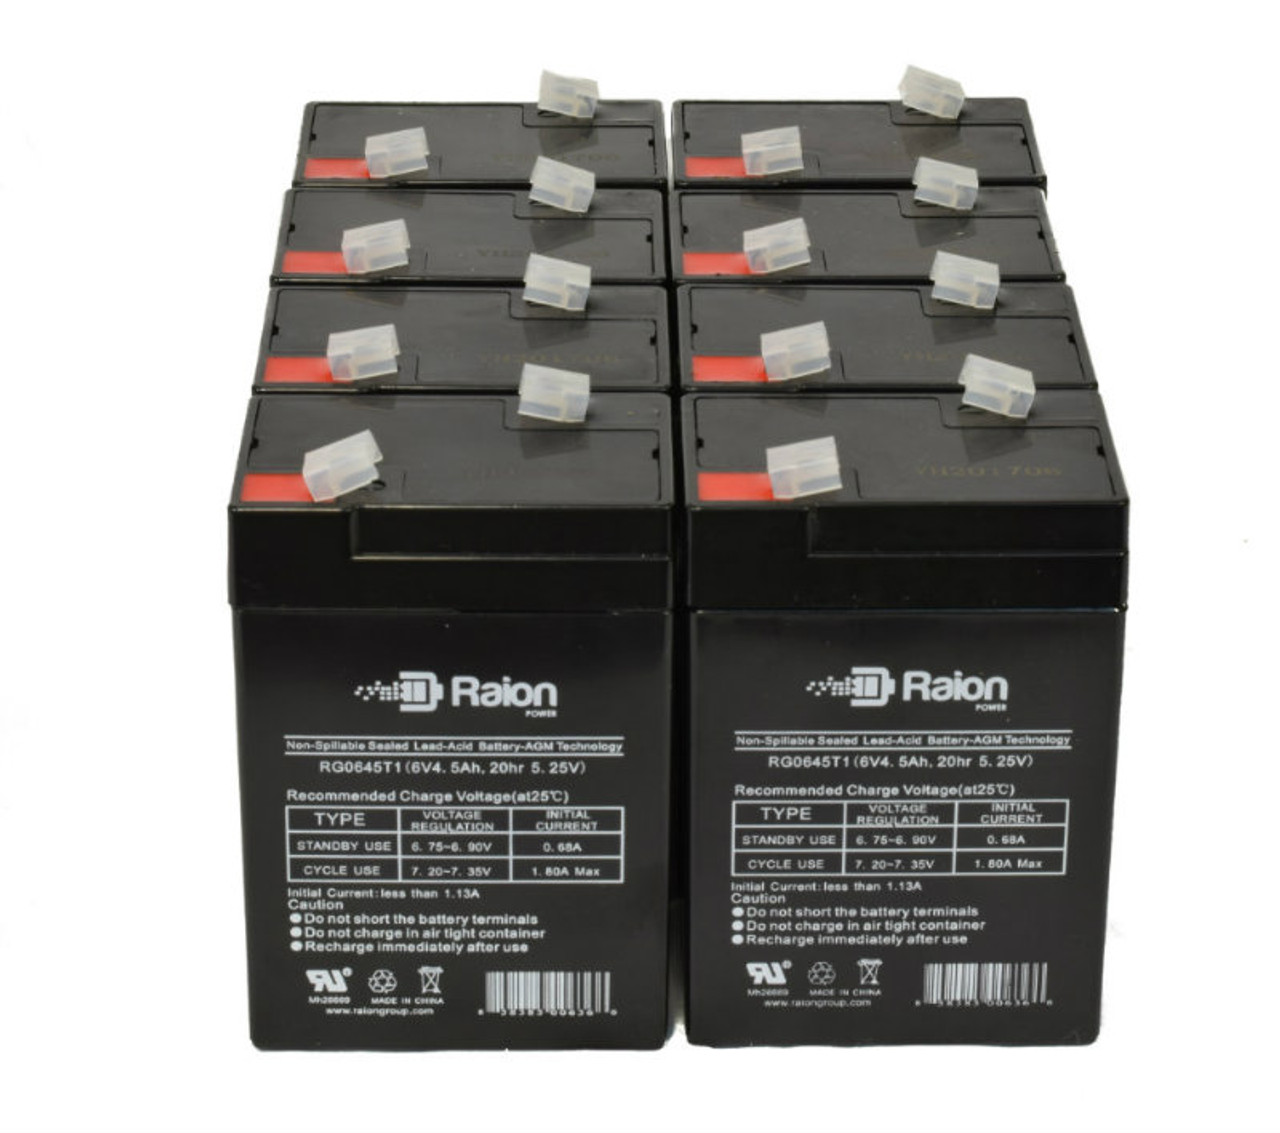 Raion Power 6 Volt 4.5Ah RG0645T1 Replacement Battery for Starlight 3FM6 - 8 Pack